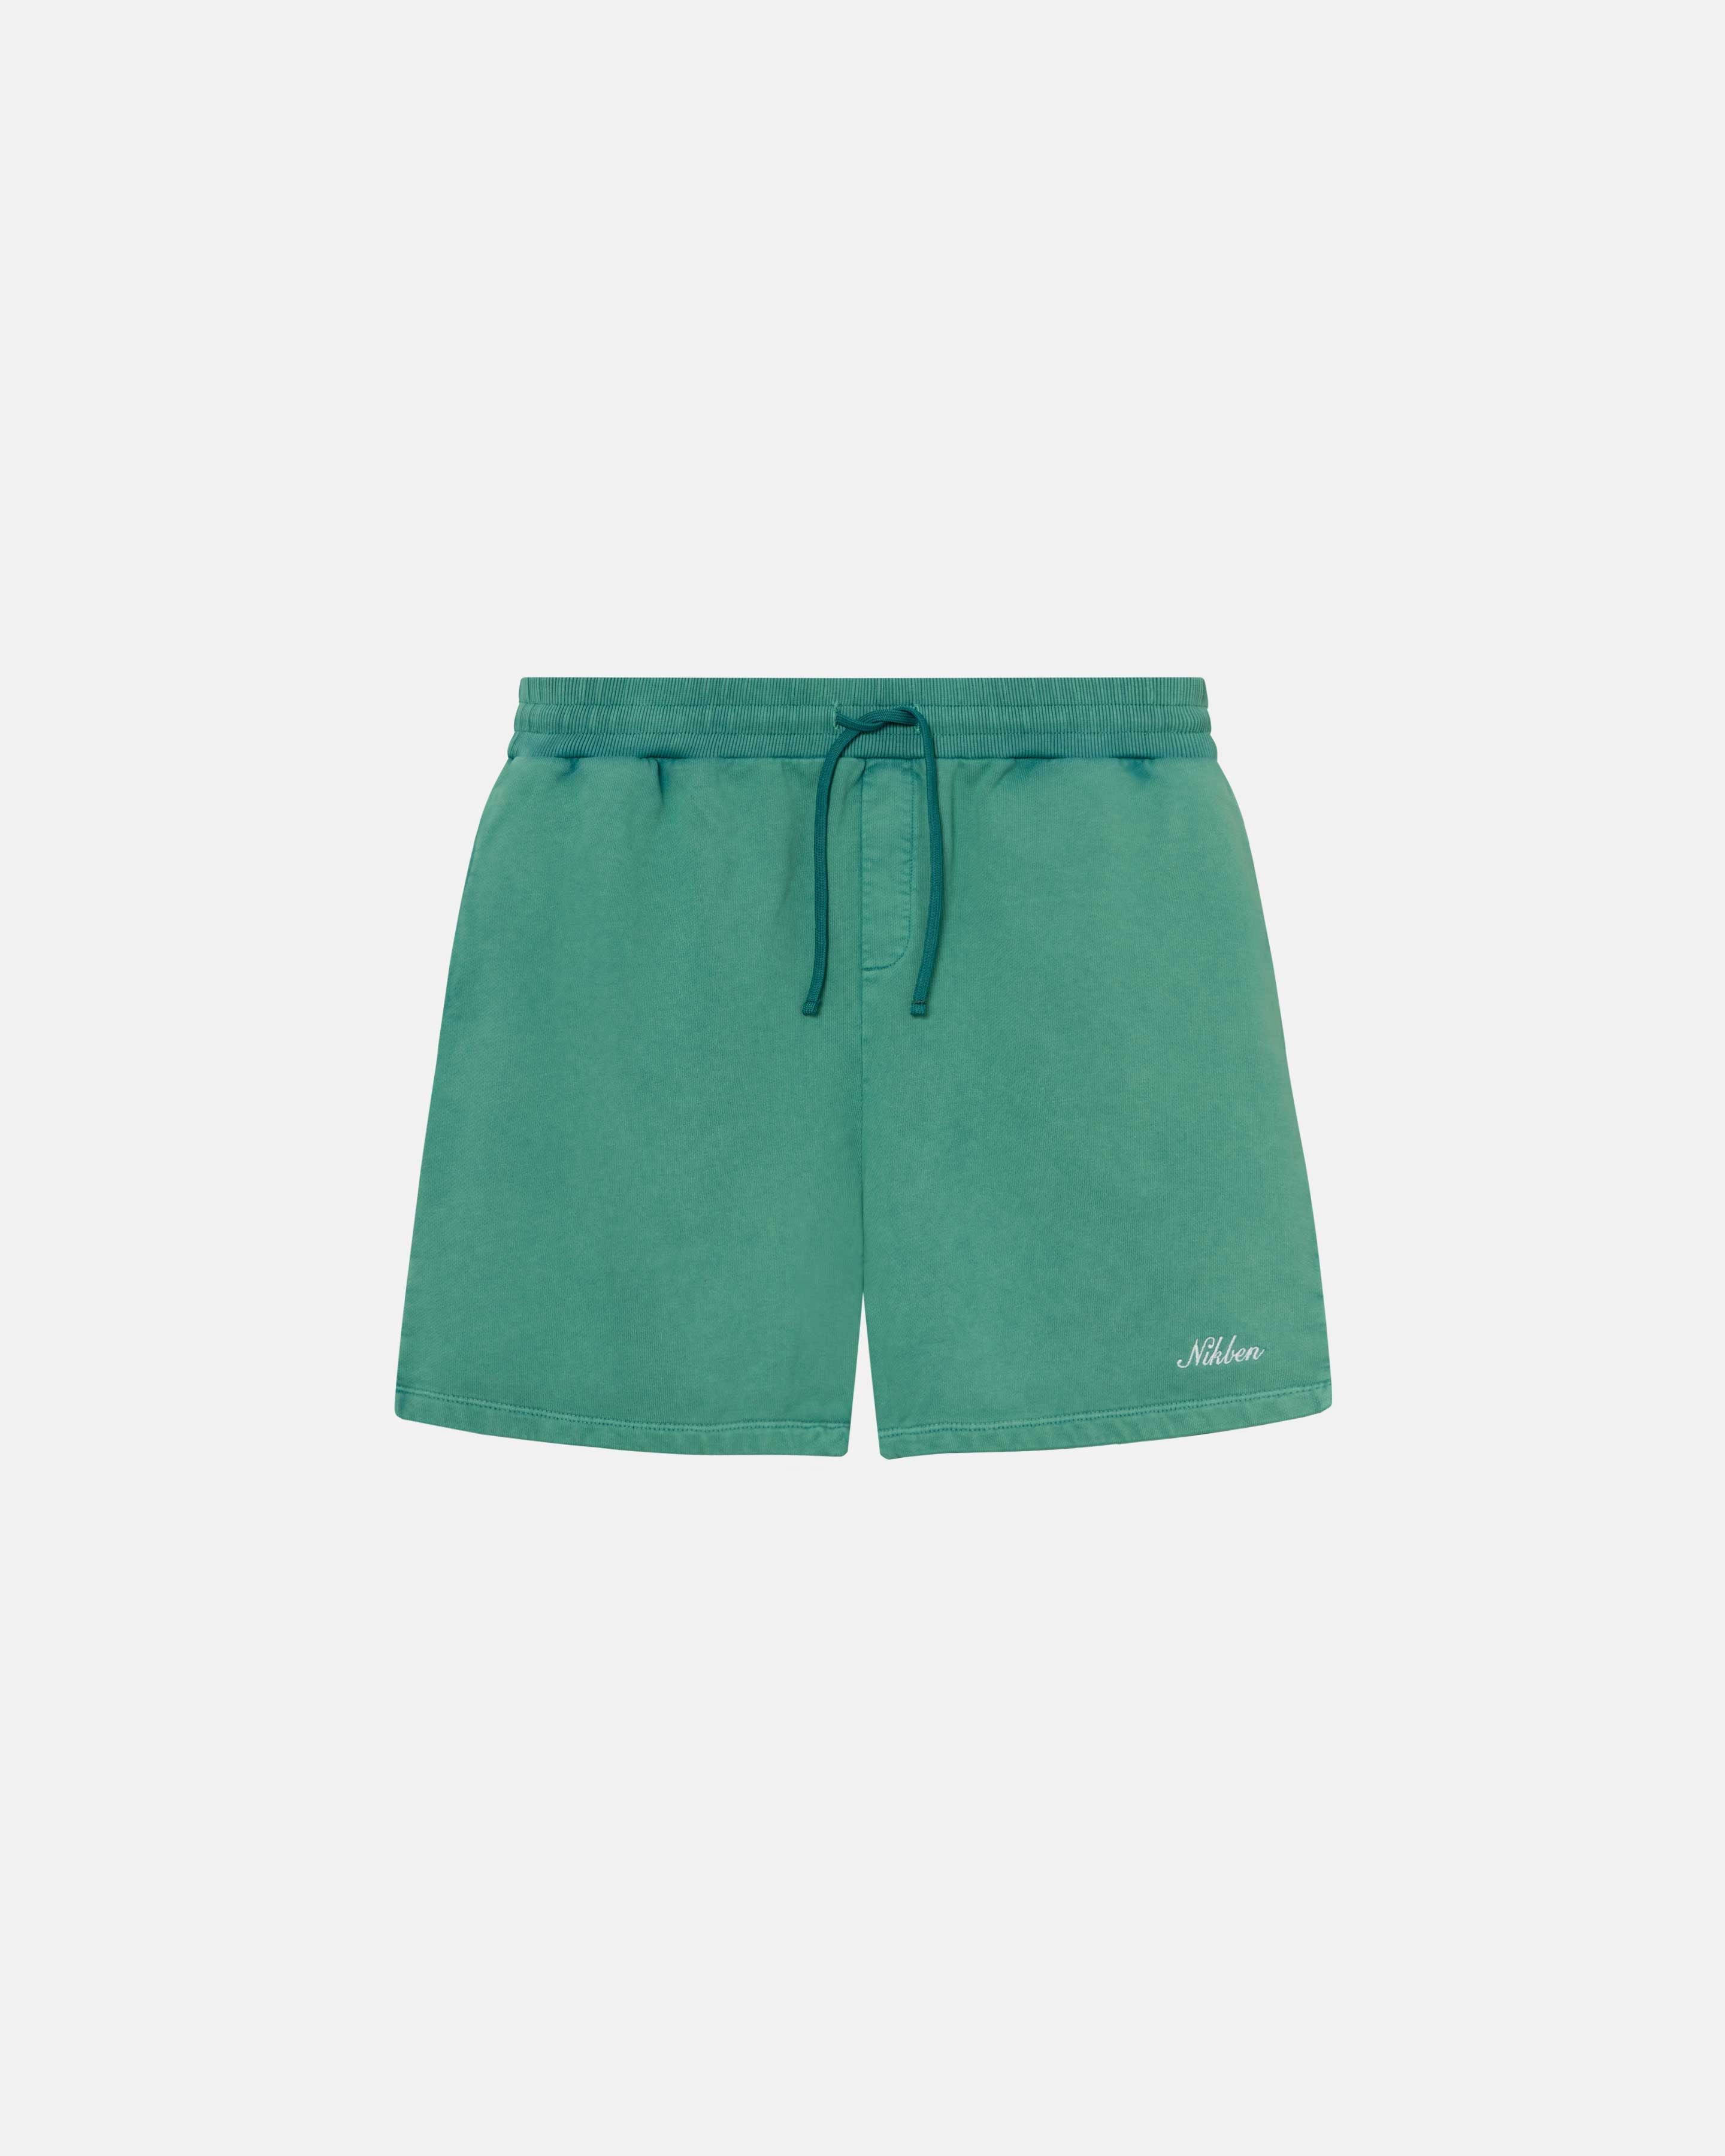 Green sweatshorts with elastic drawstrings and an embroidered script logo on the front leg